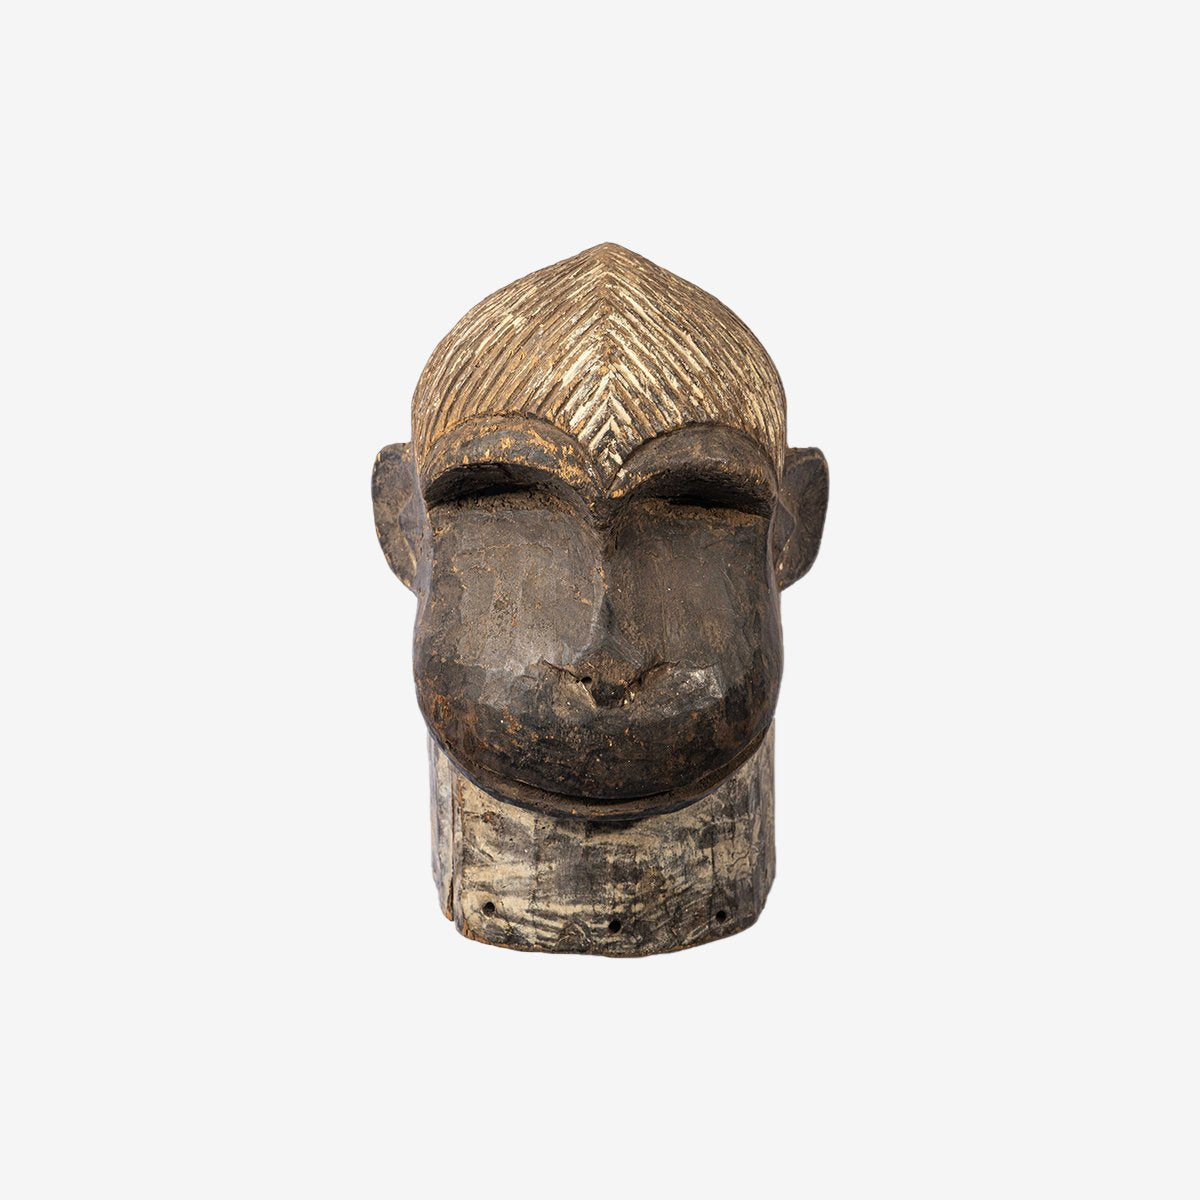 Hemba Soko Mask - Authentic African handicrafts | Clothing, bags, painting, toys & more - CULTURE HUB by Muthoni Unchained